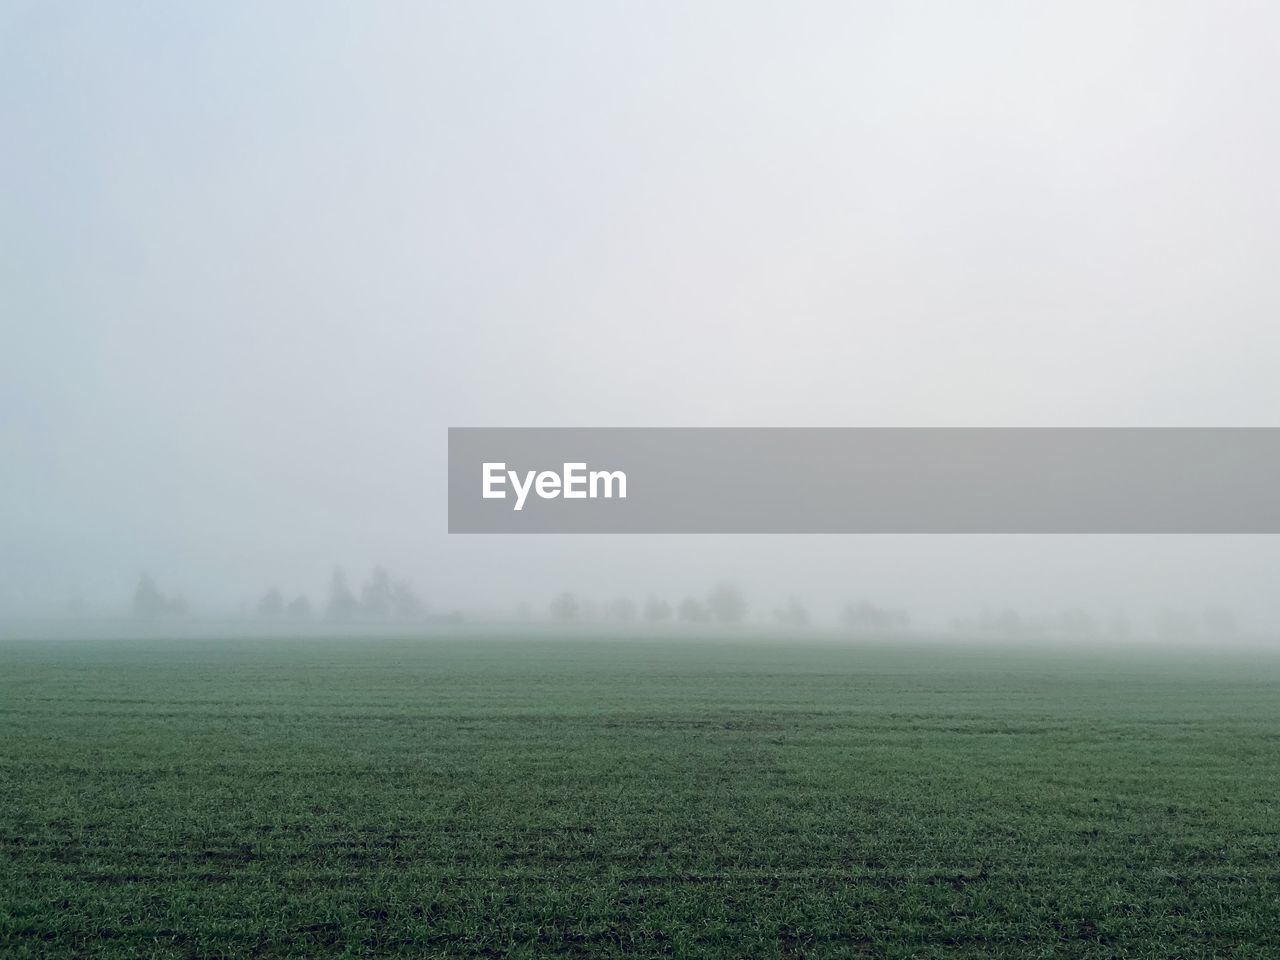 fog, mist, environment, morning, landscape, horizon, plant, land, nature, field, plain, haze, tranquility, grass, beauty in nature, no people, tranquil scene, rural scene, scenics - nature, sky, natural environment, agriculture, green, sunlight, outdoors, tree, copy space, day, non-urban scene, winter, dawn, idyllic, drizzle, wet, grassland